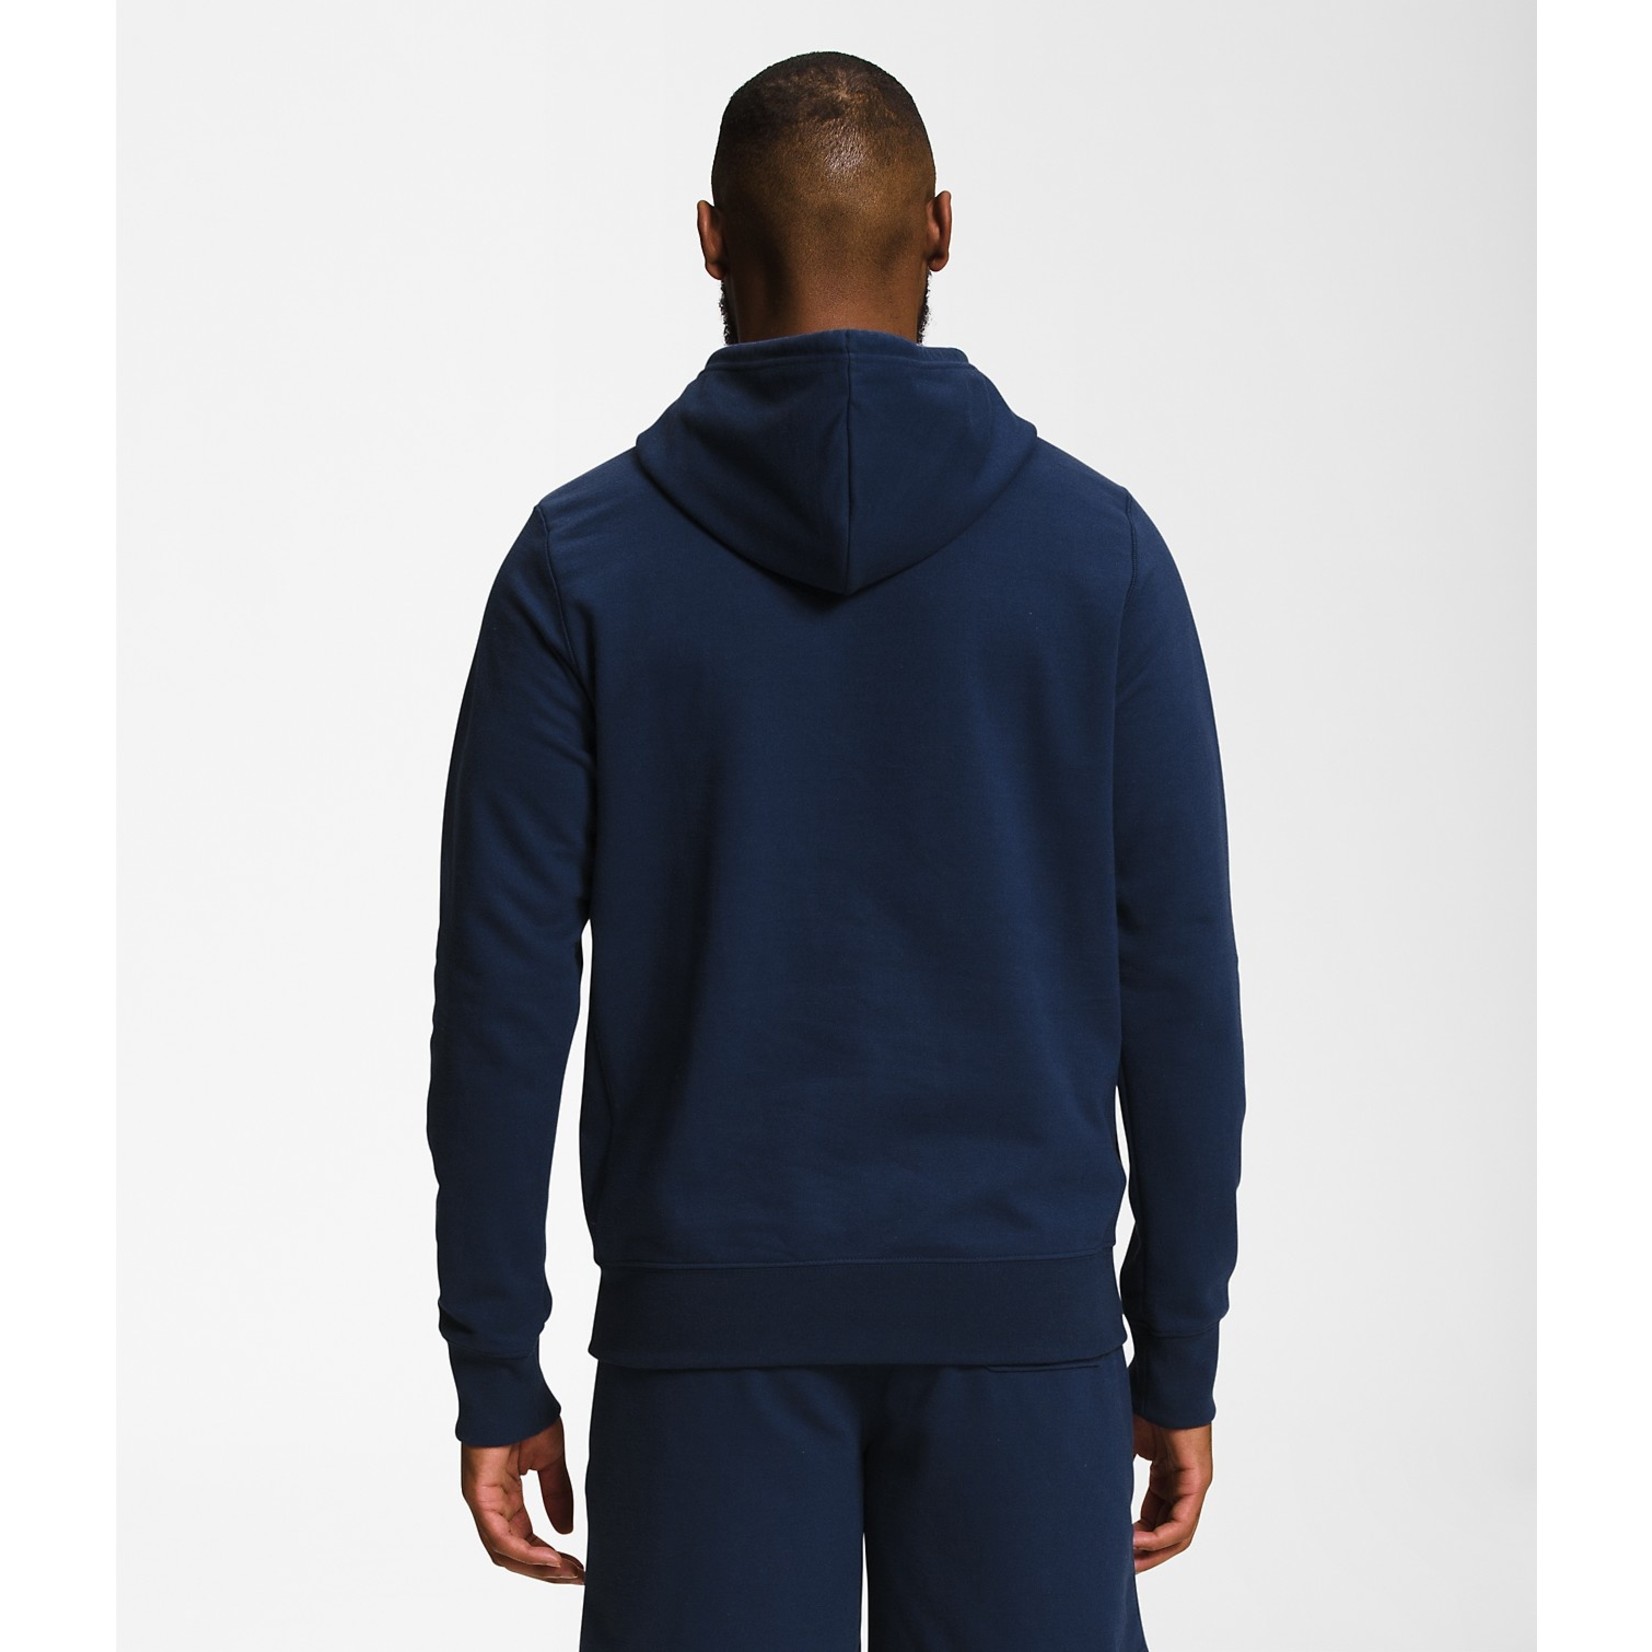 THE NORTH FACE Men's Heritage Patch Pullover Hoodie